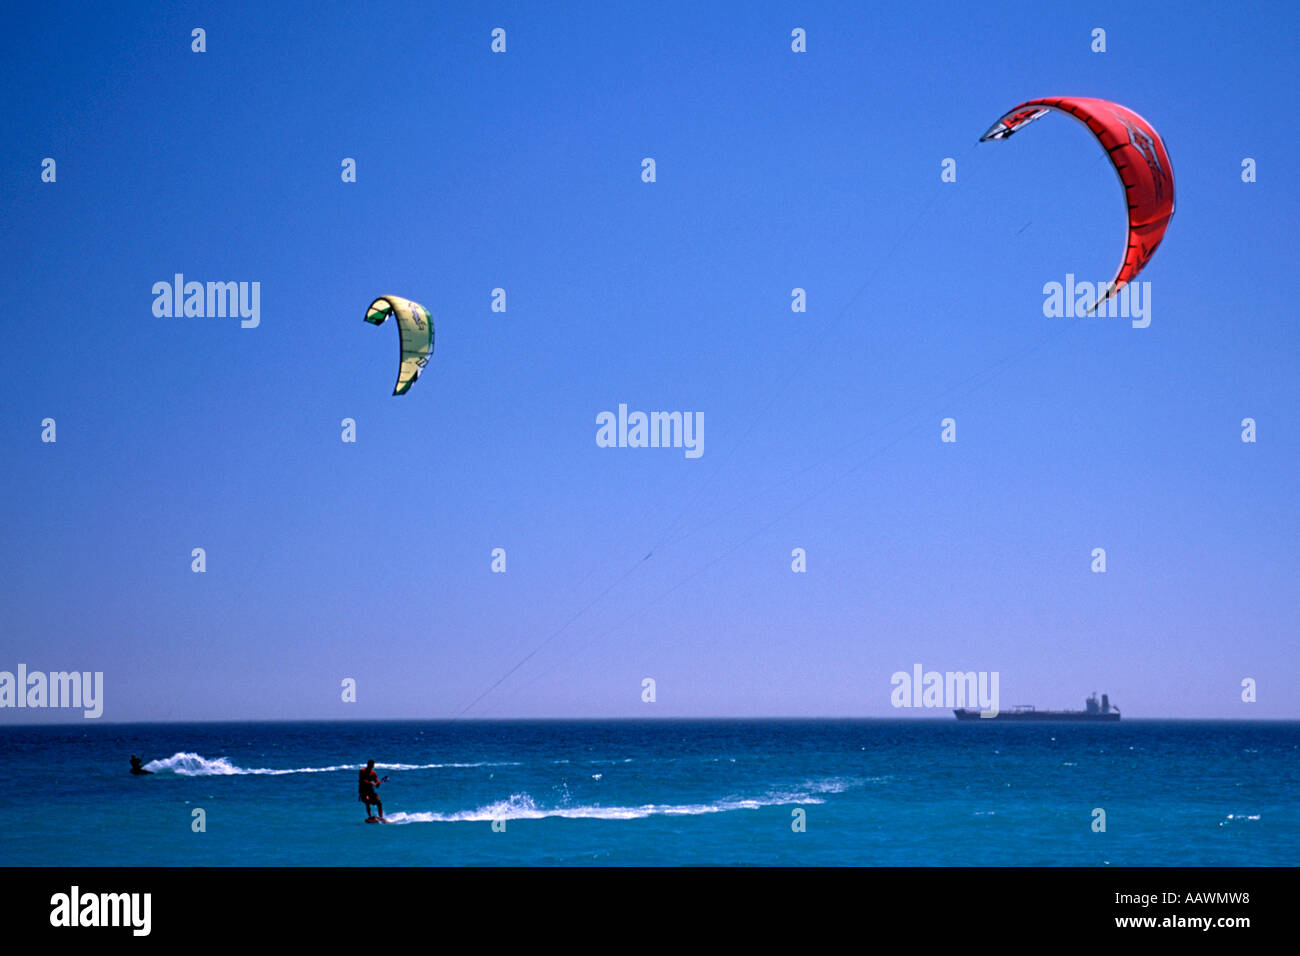 Kite surfers off Blouberg in Table Bay South Africa with an oil tanker in the background. Stock Photo